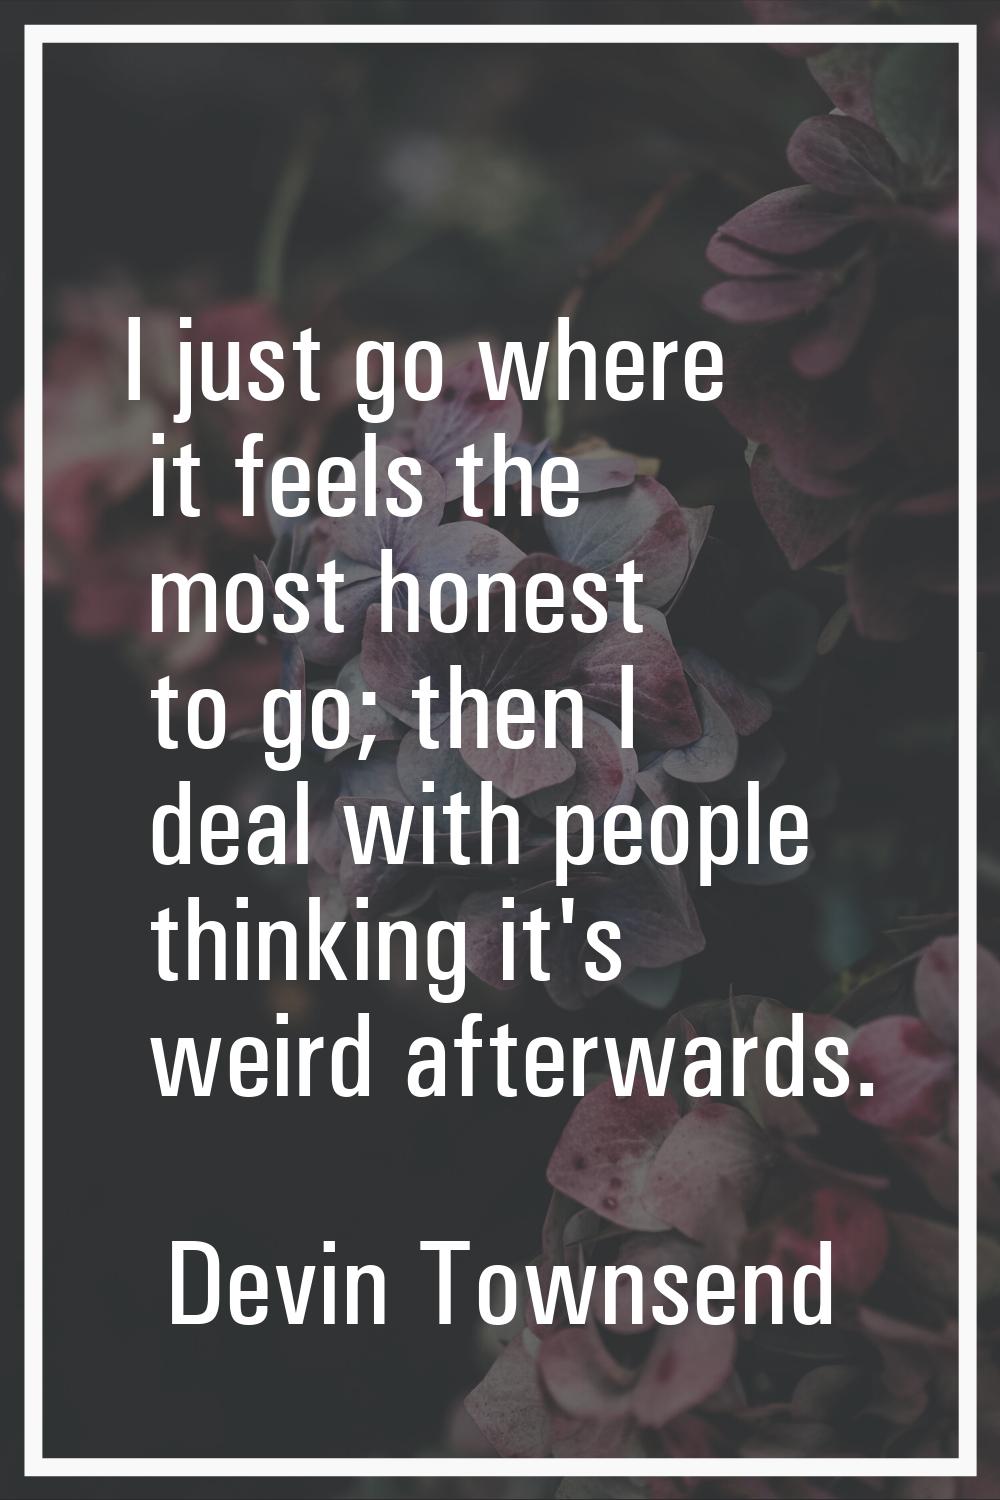 I just go where it feels the most honest to go; then I deal with people thinking it's weird afterwa